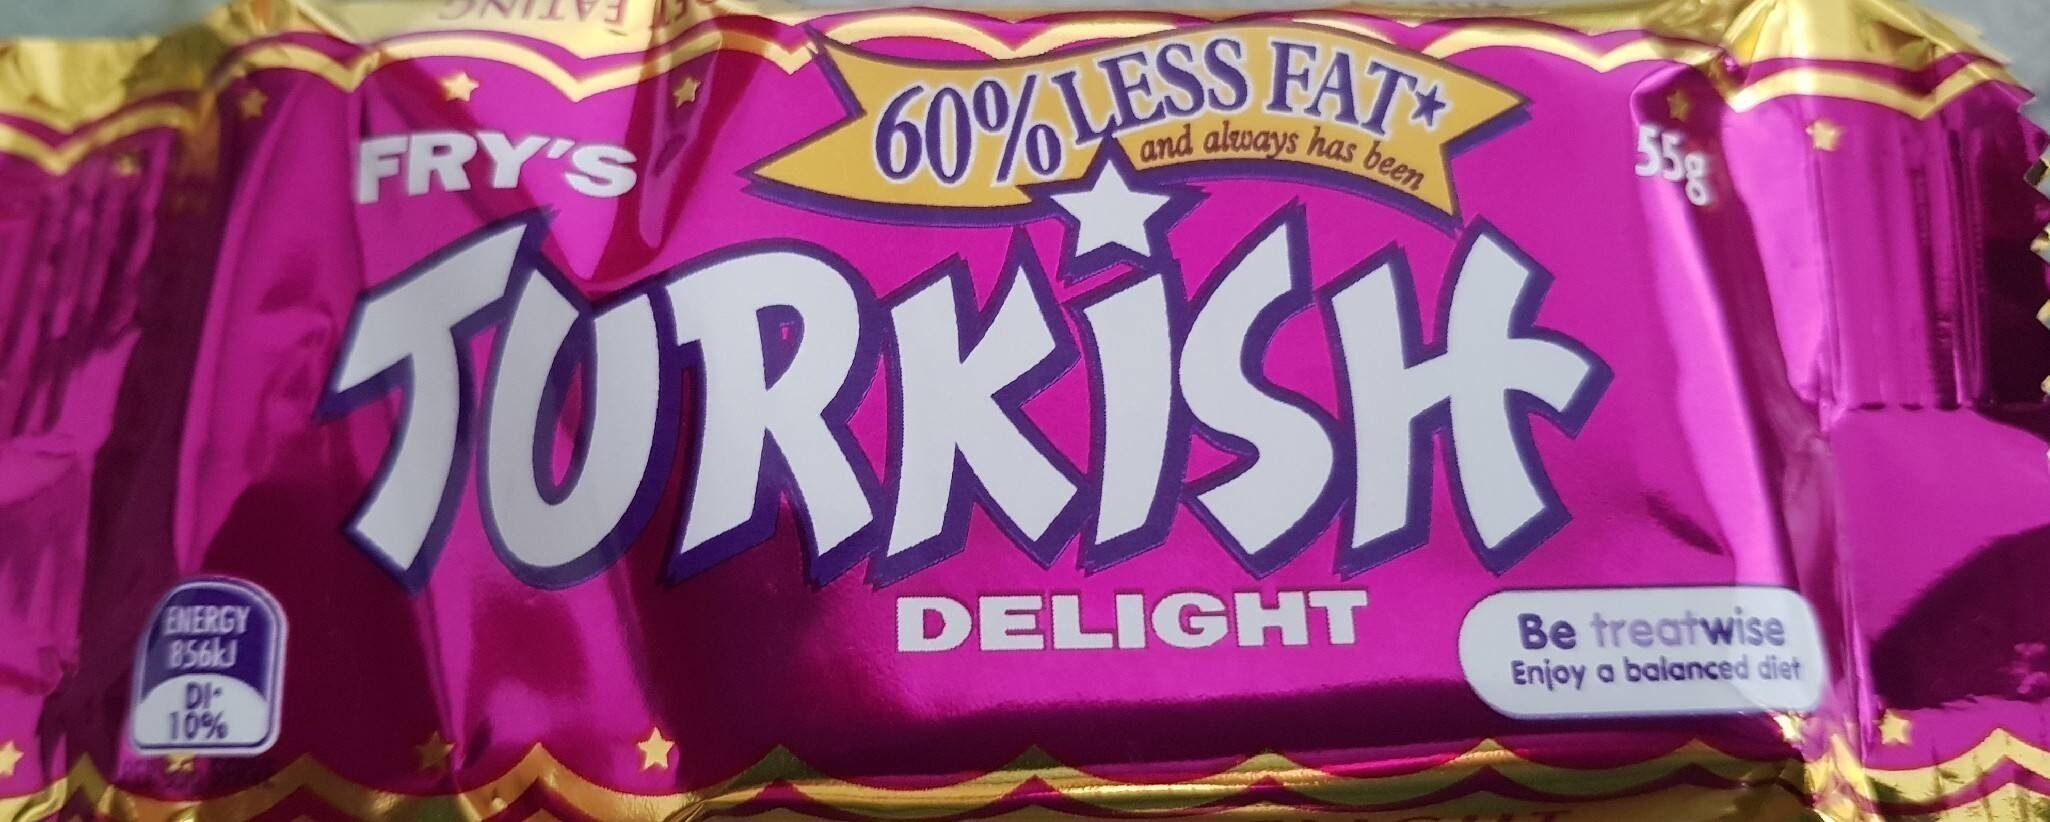 Fry's Turkish Delight - Product